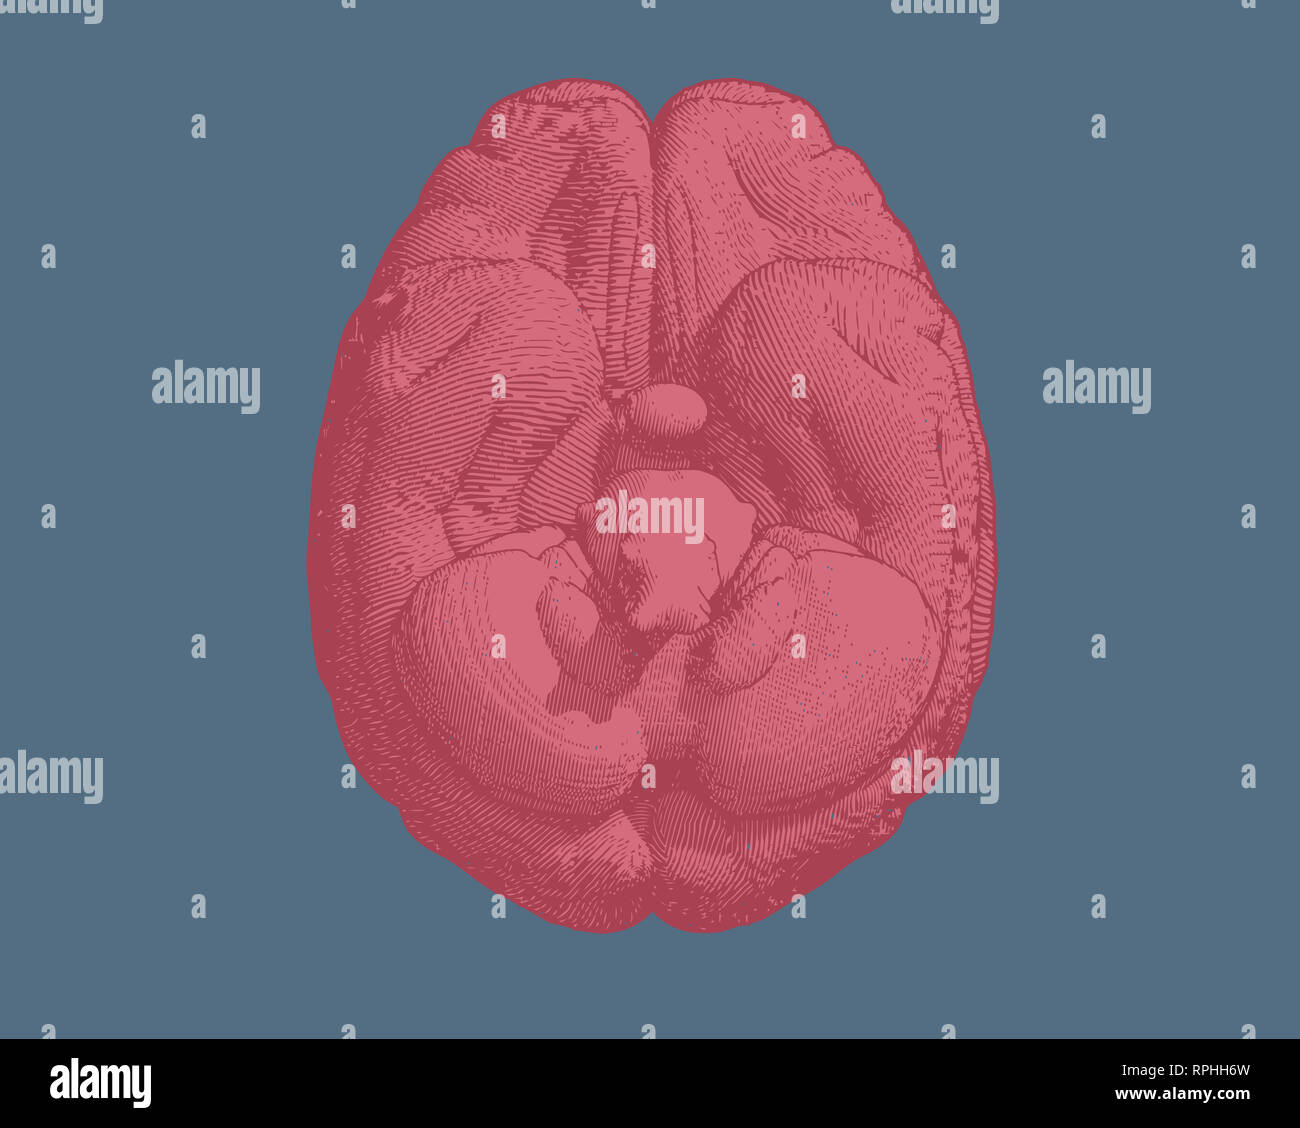 Pink Engraving Brain Inferior View Illustration Isolated On